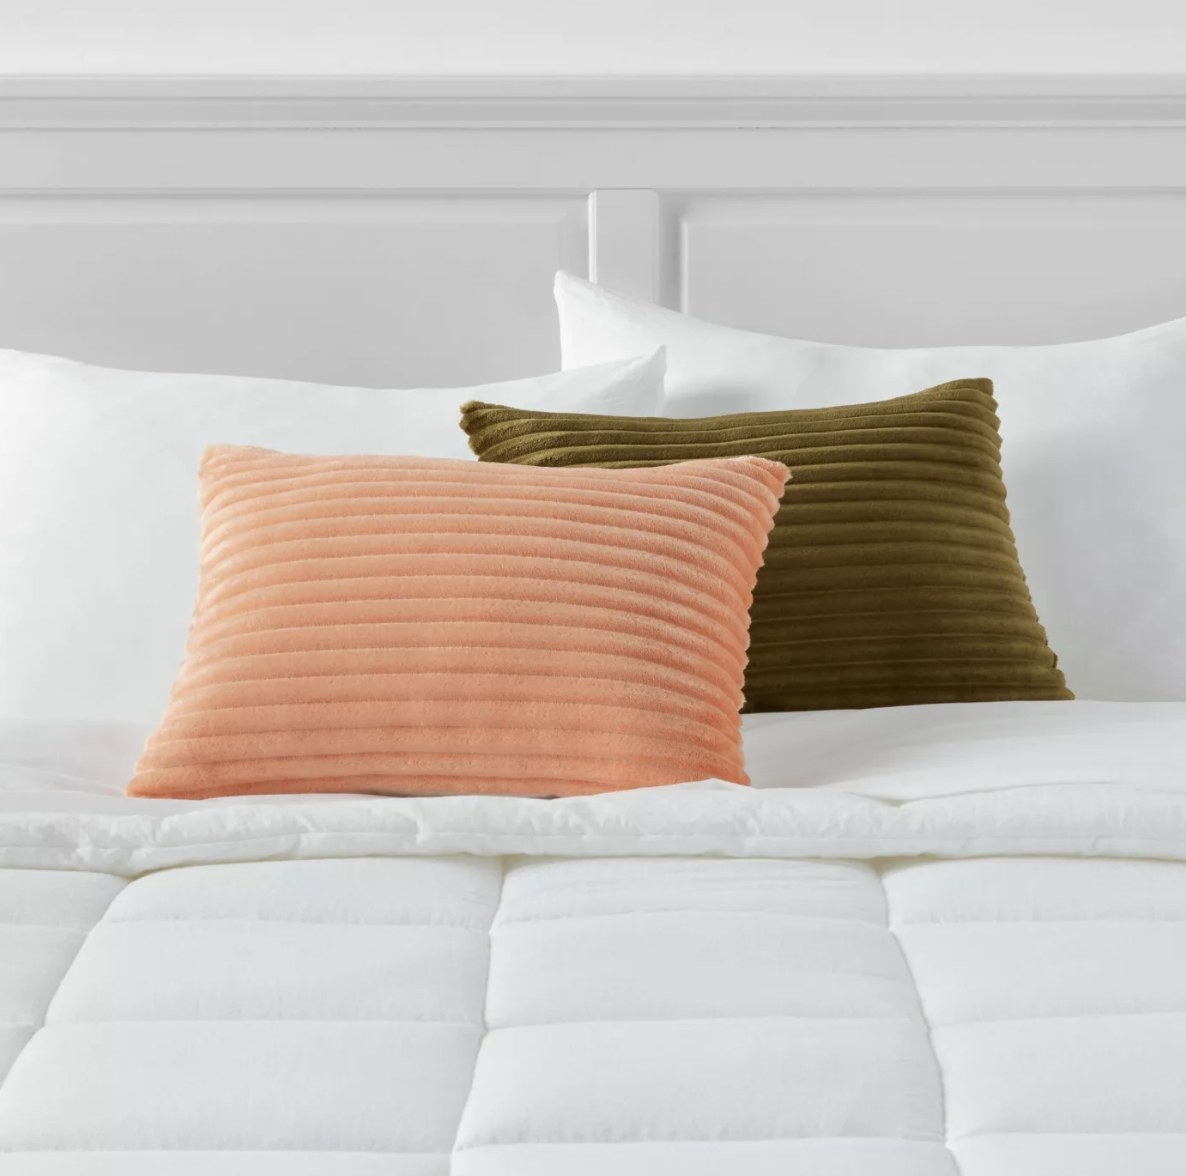 There are a set of peach and olive colored pillows with horizontal plush indents